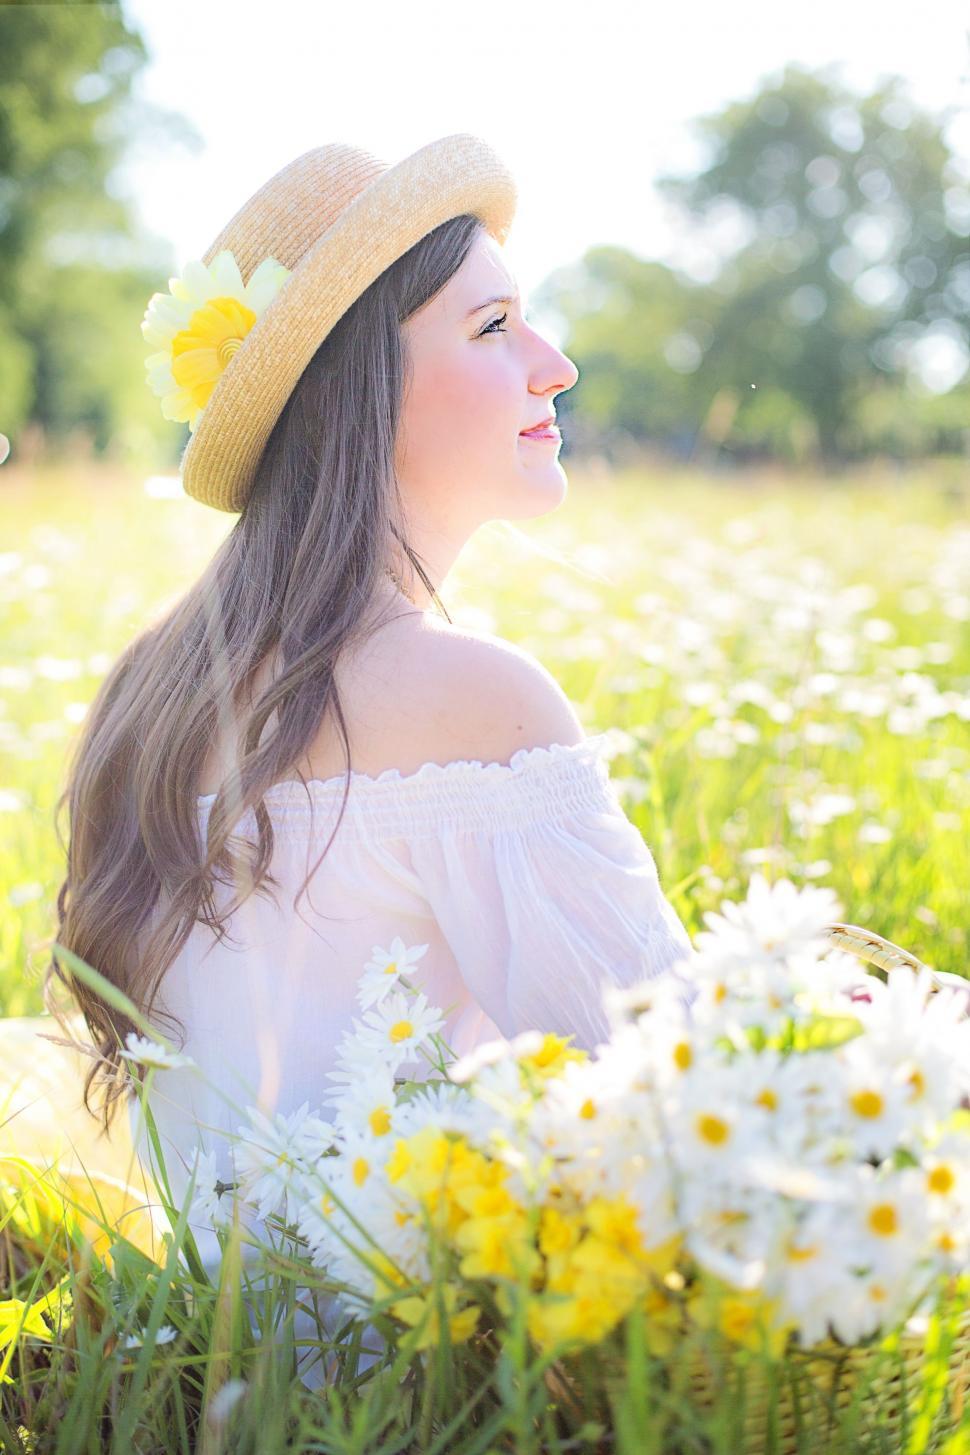 Free Image of Woman With Hat in White Flower Field - Looking away  